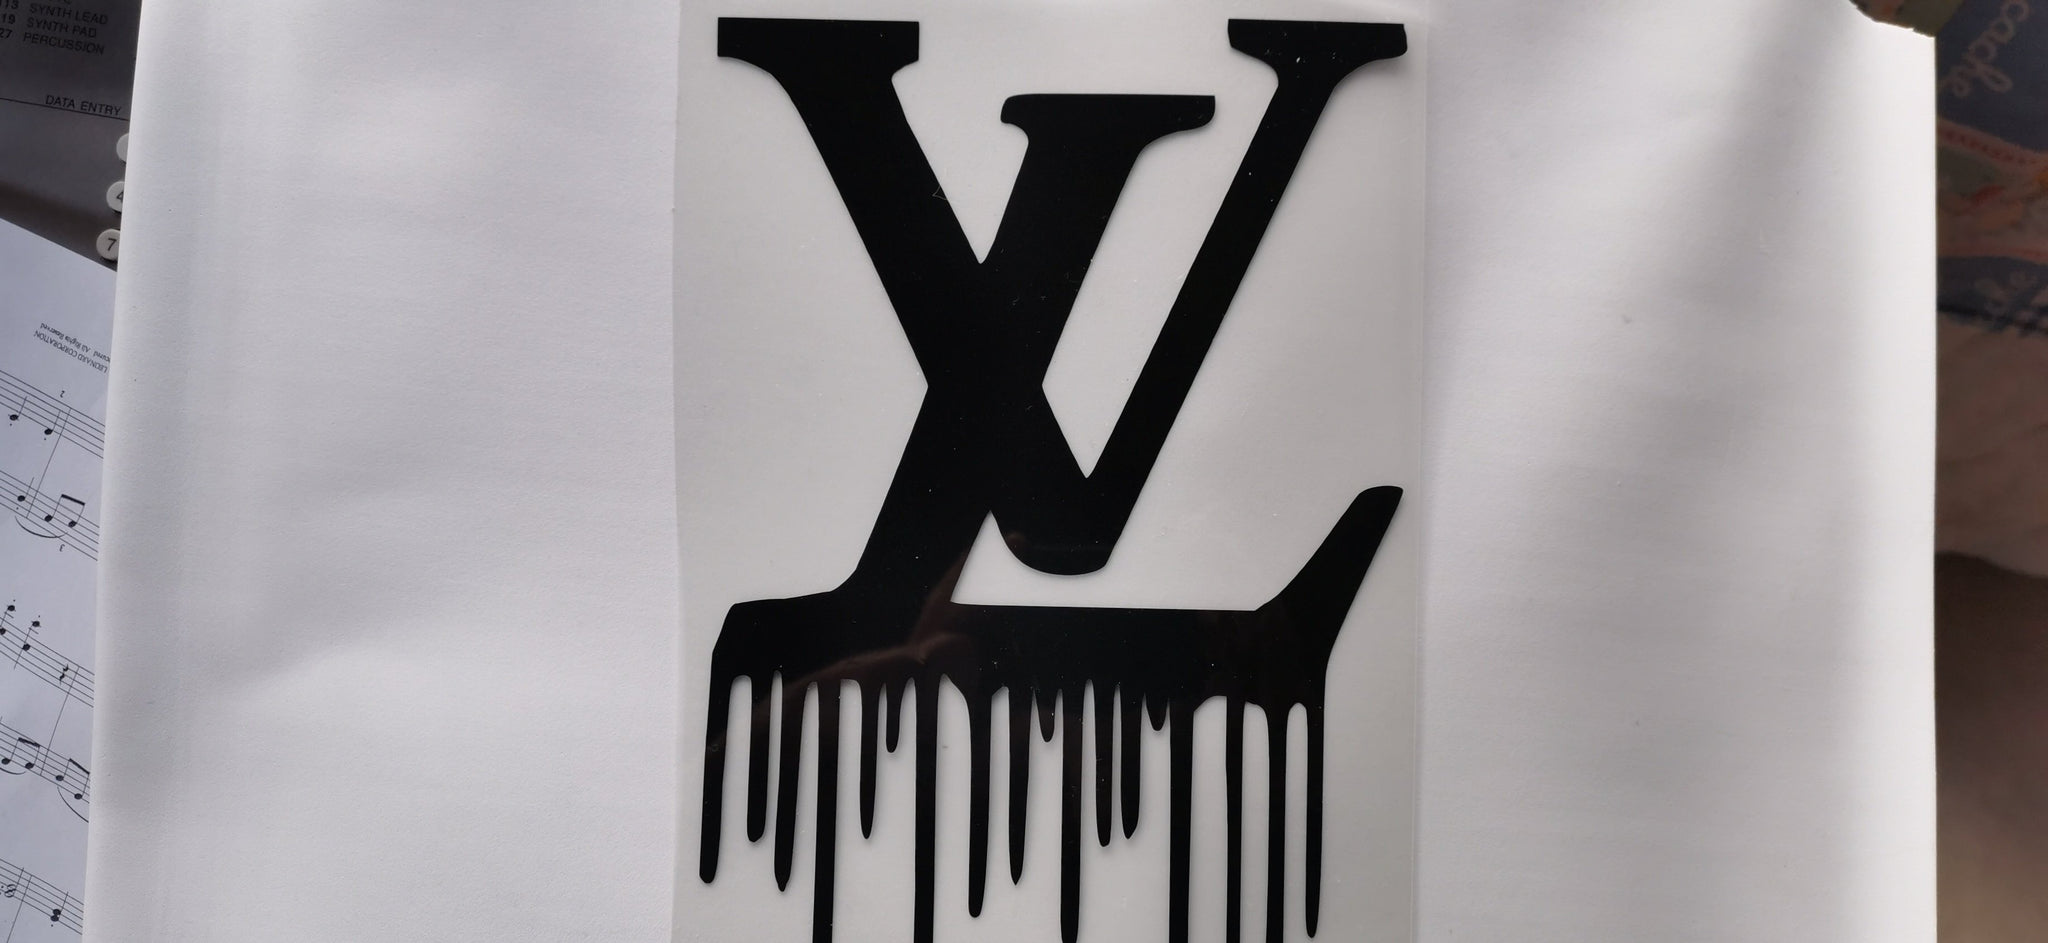 louis vuitton dripping gold logo with black background 